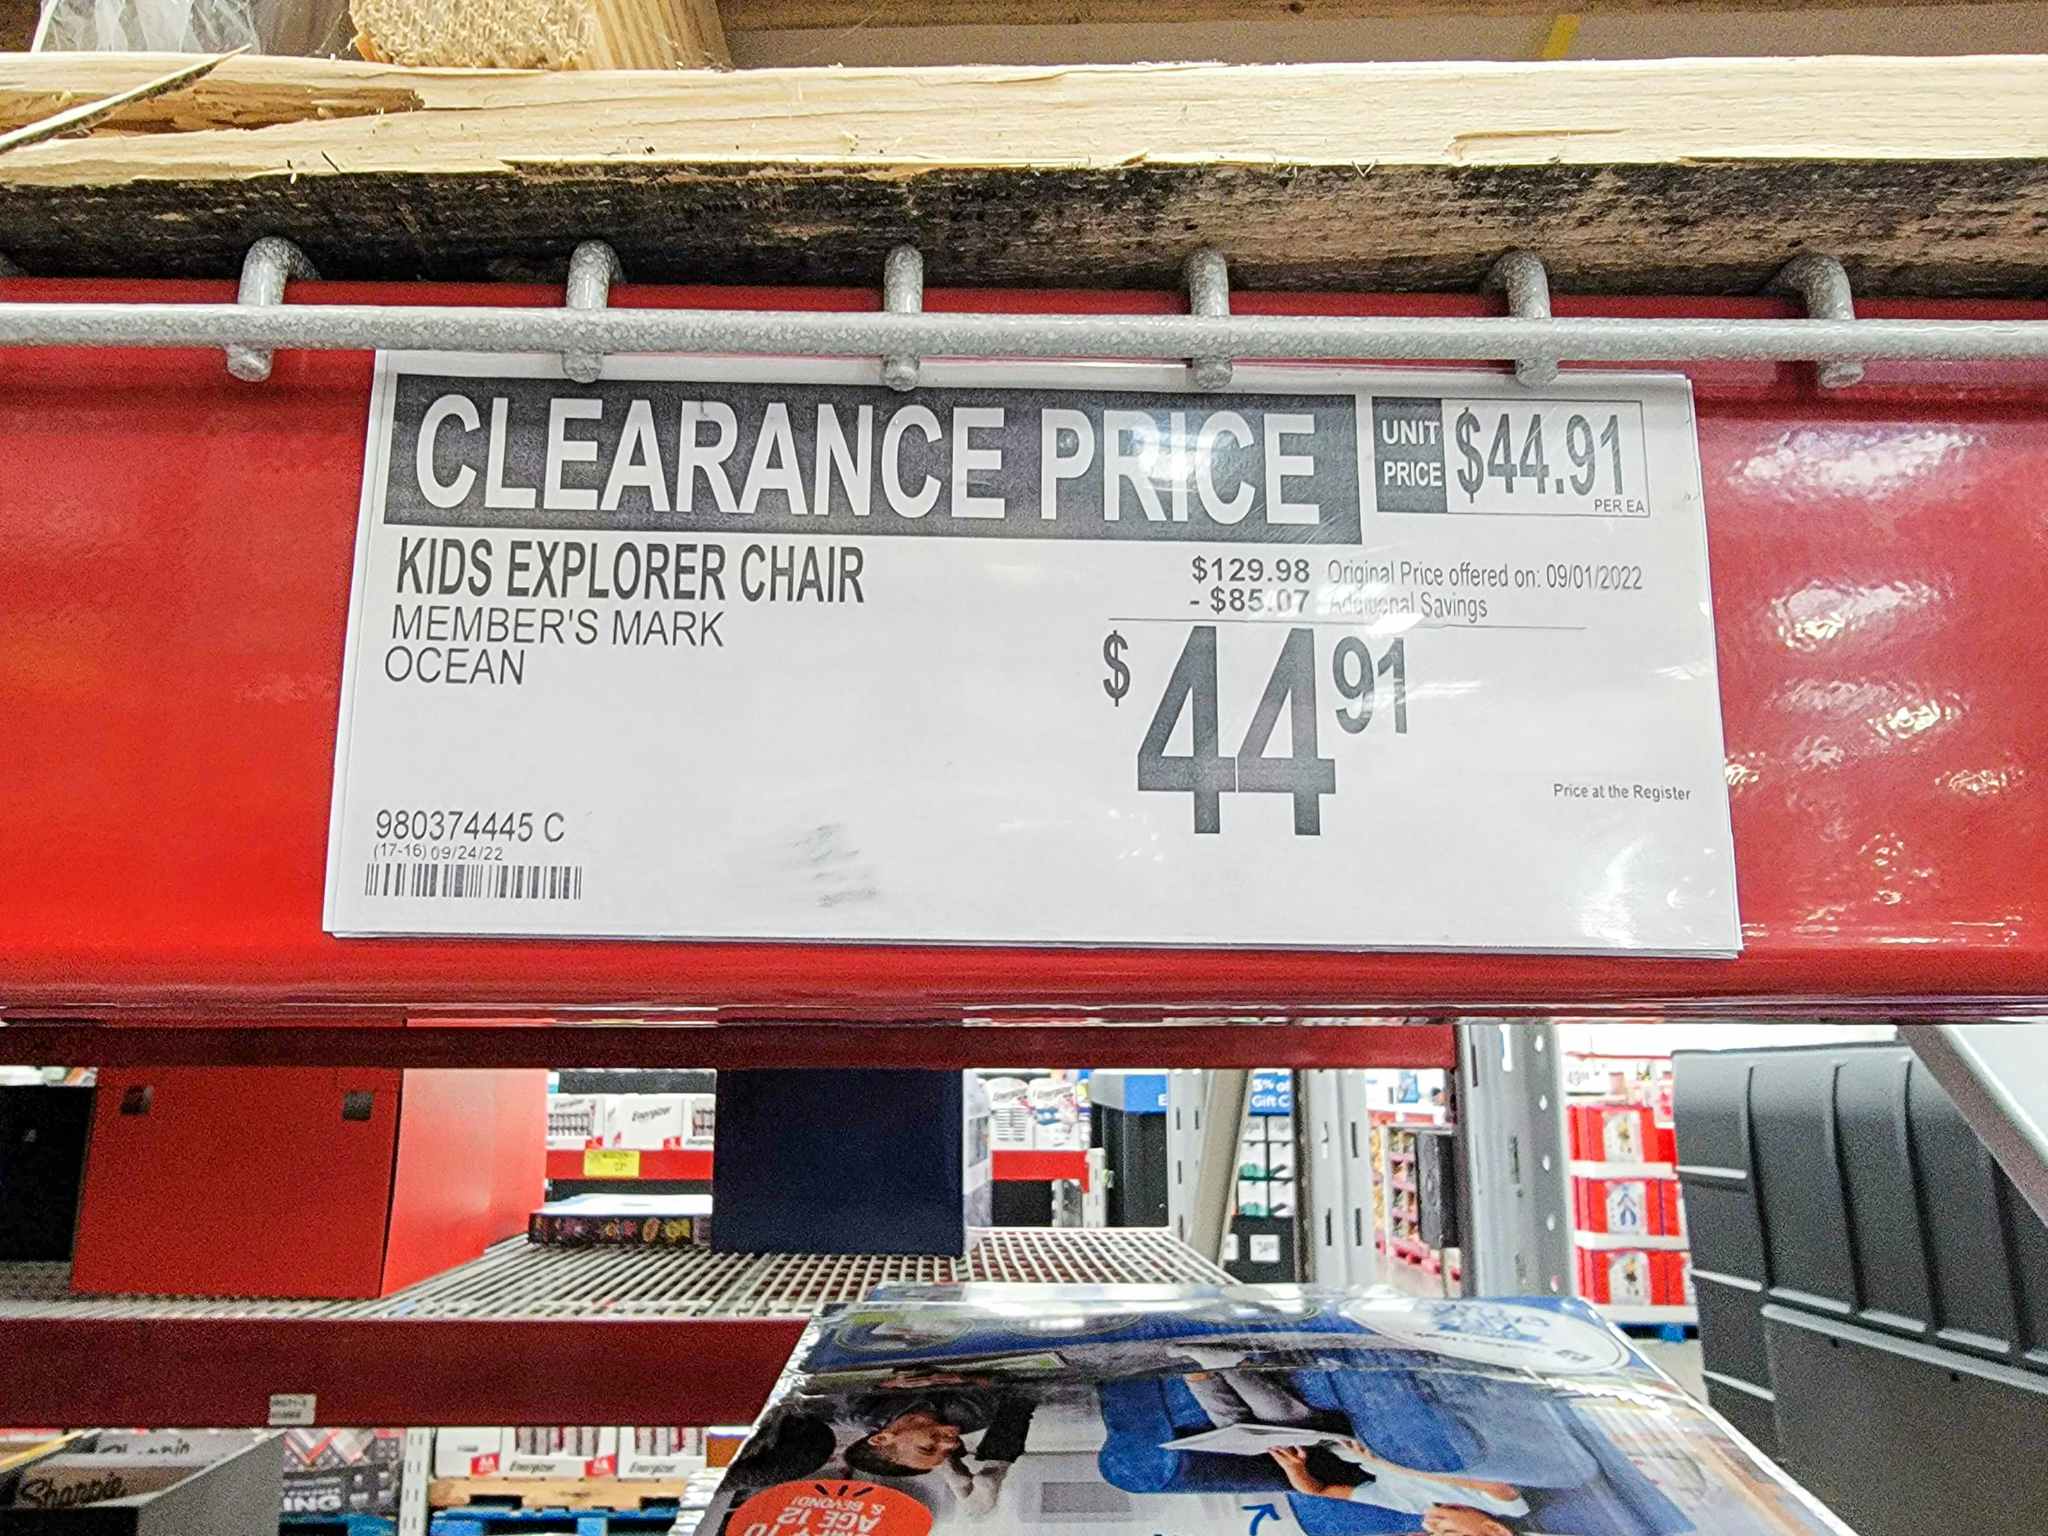 clearance sign for 44.91 kids jumbo explorer chairs